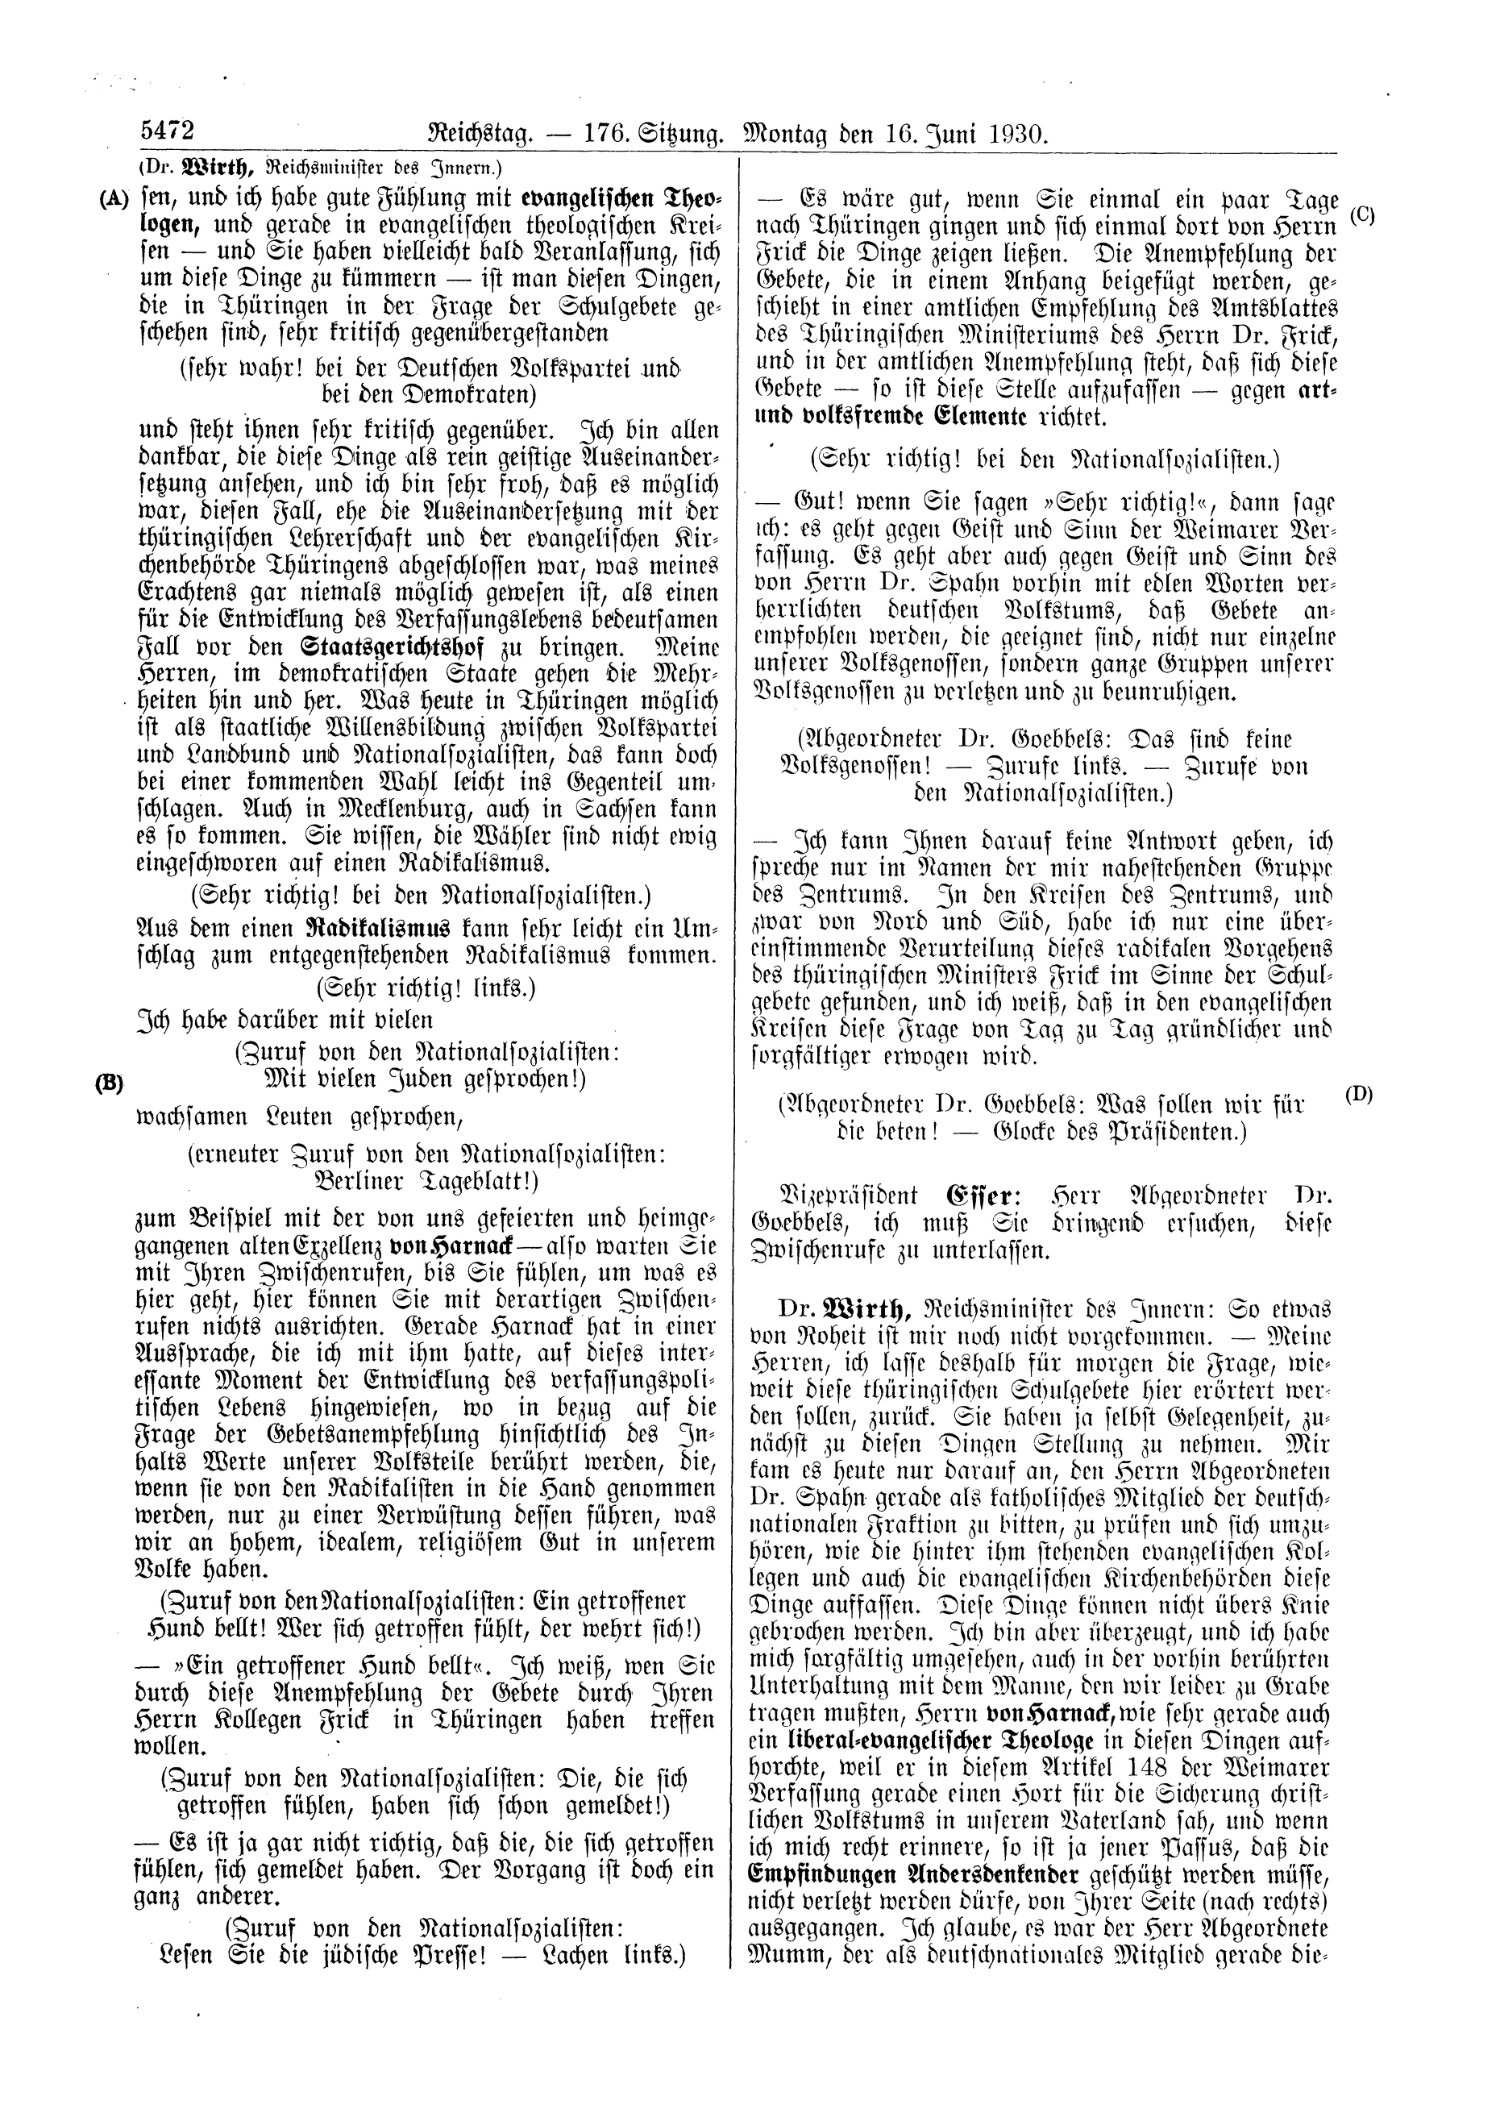 Scan of page 5472